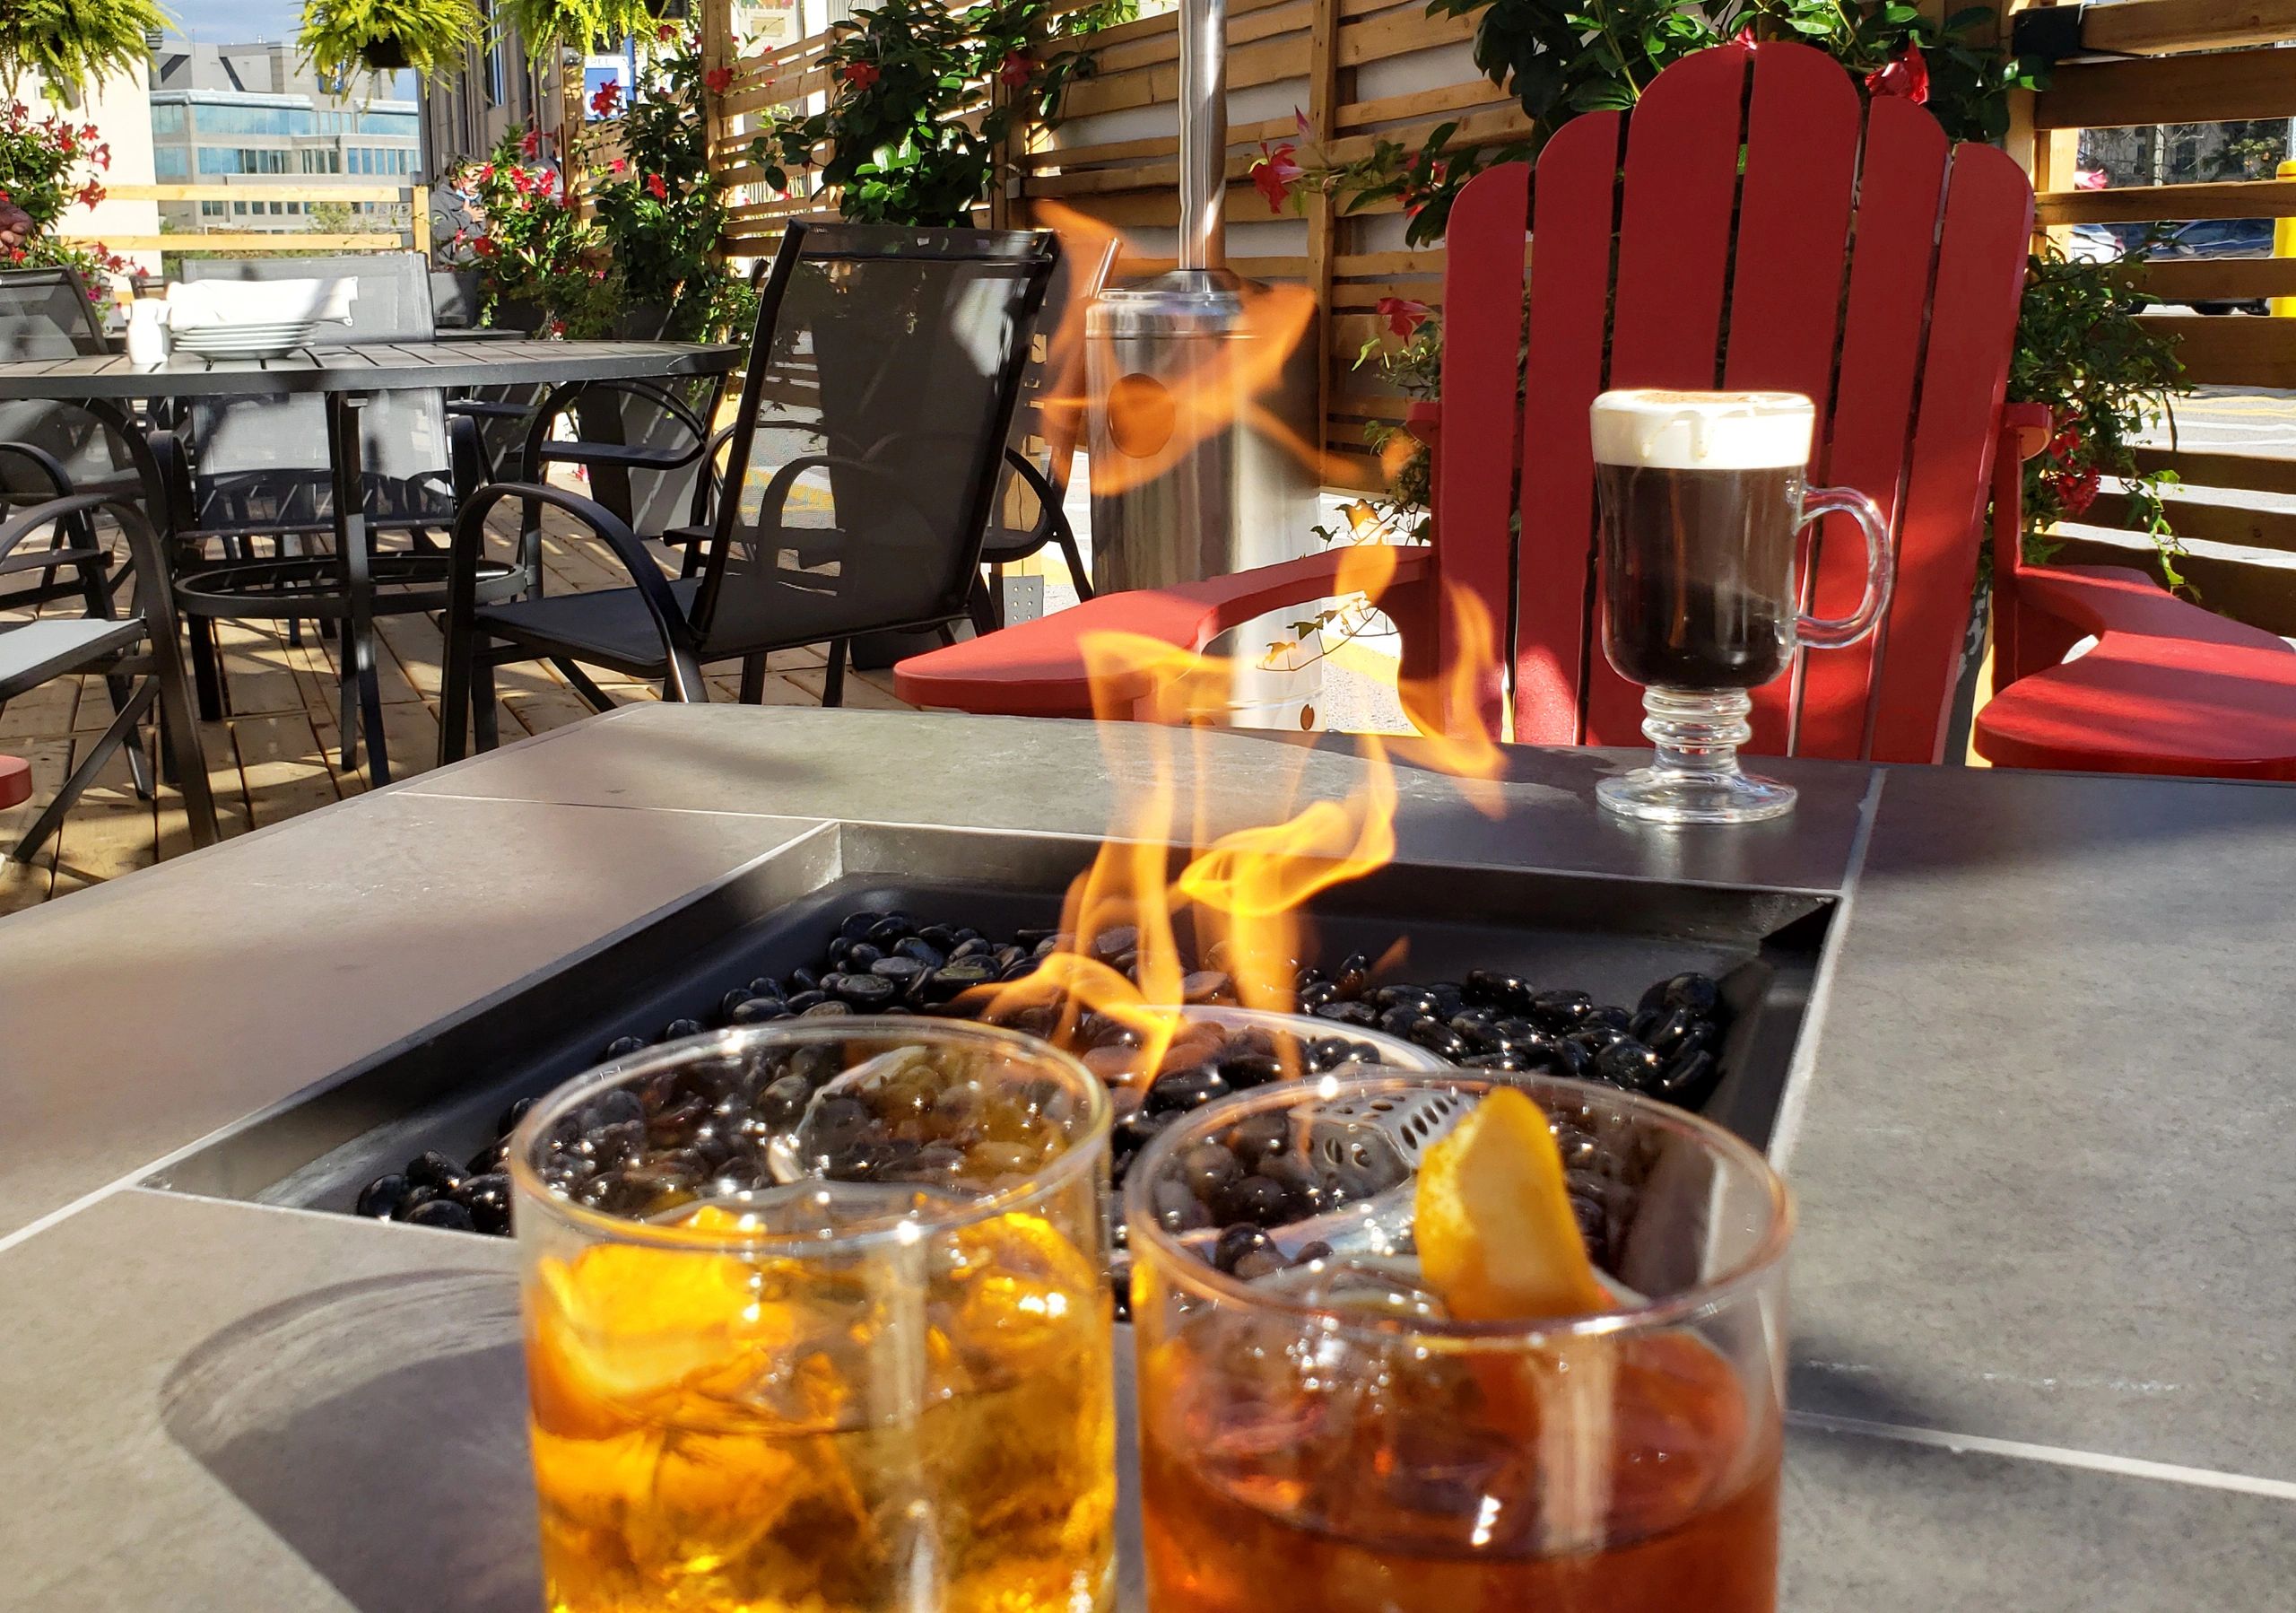 Fall cocktails by private firepit in outdoor Patio Bar & Grill with Muskoka chairs in Richmond Hill